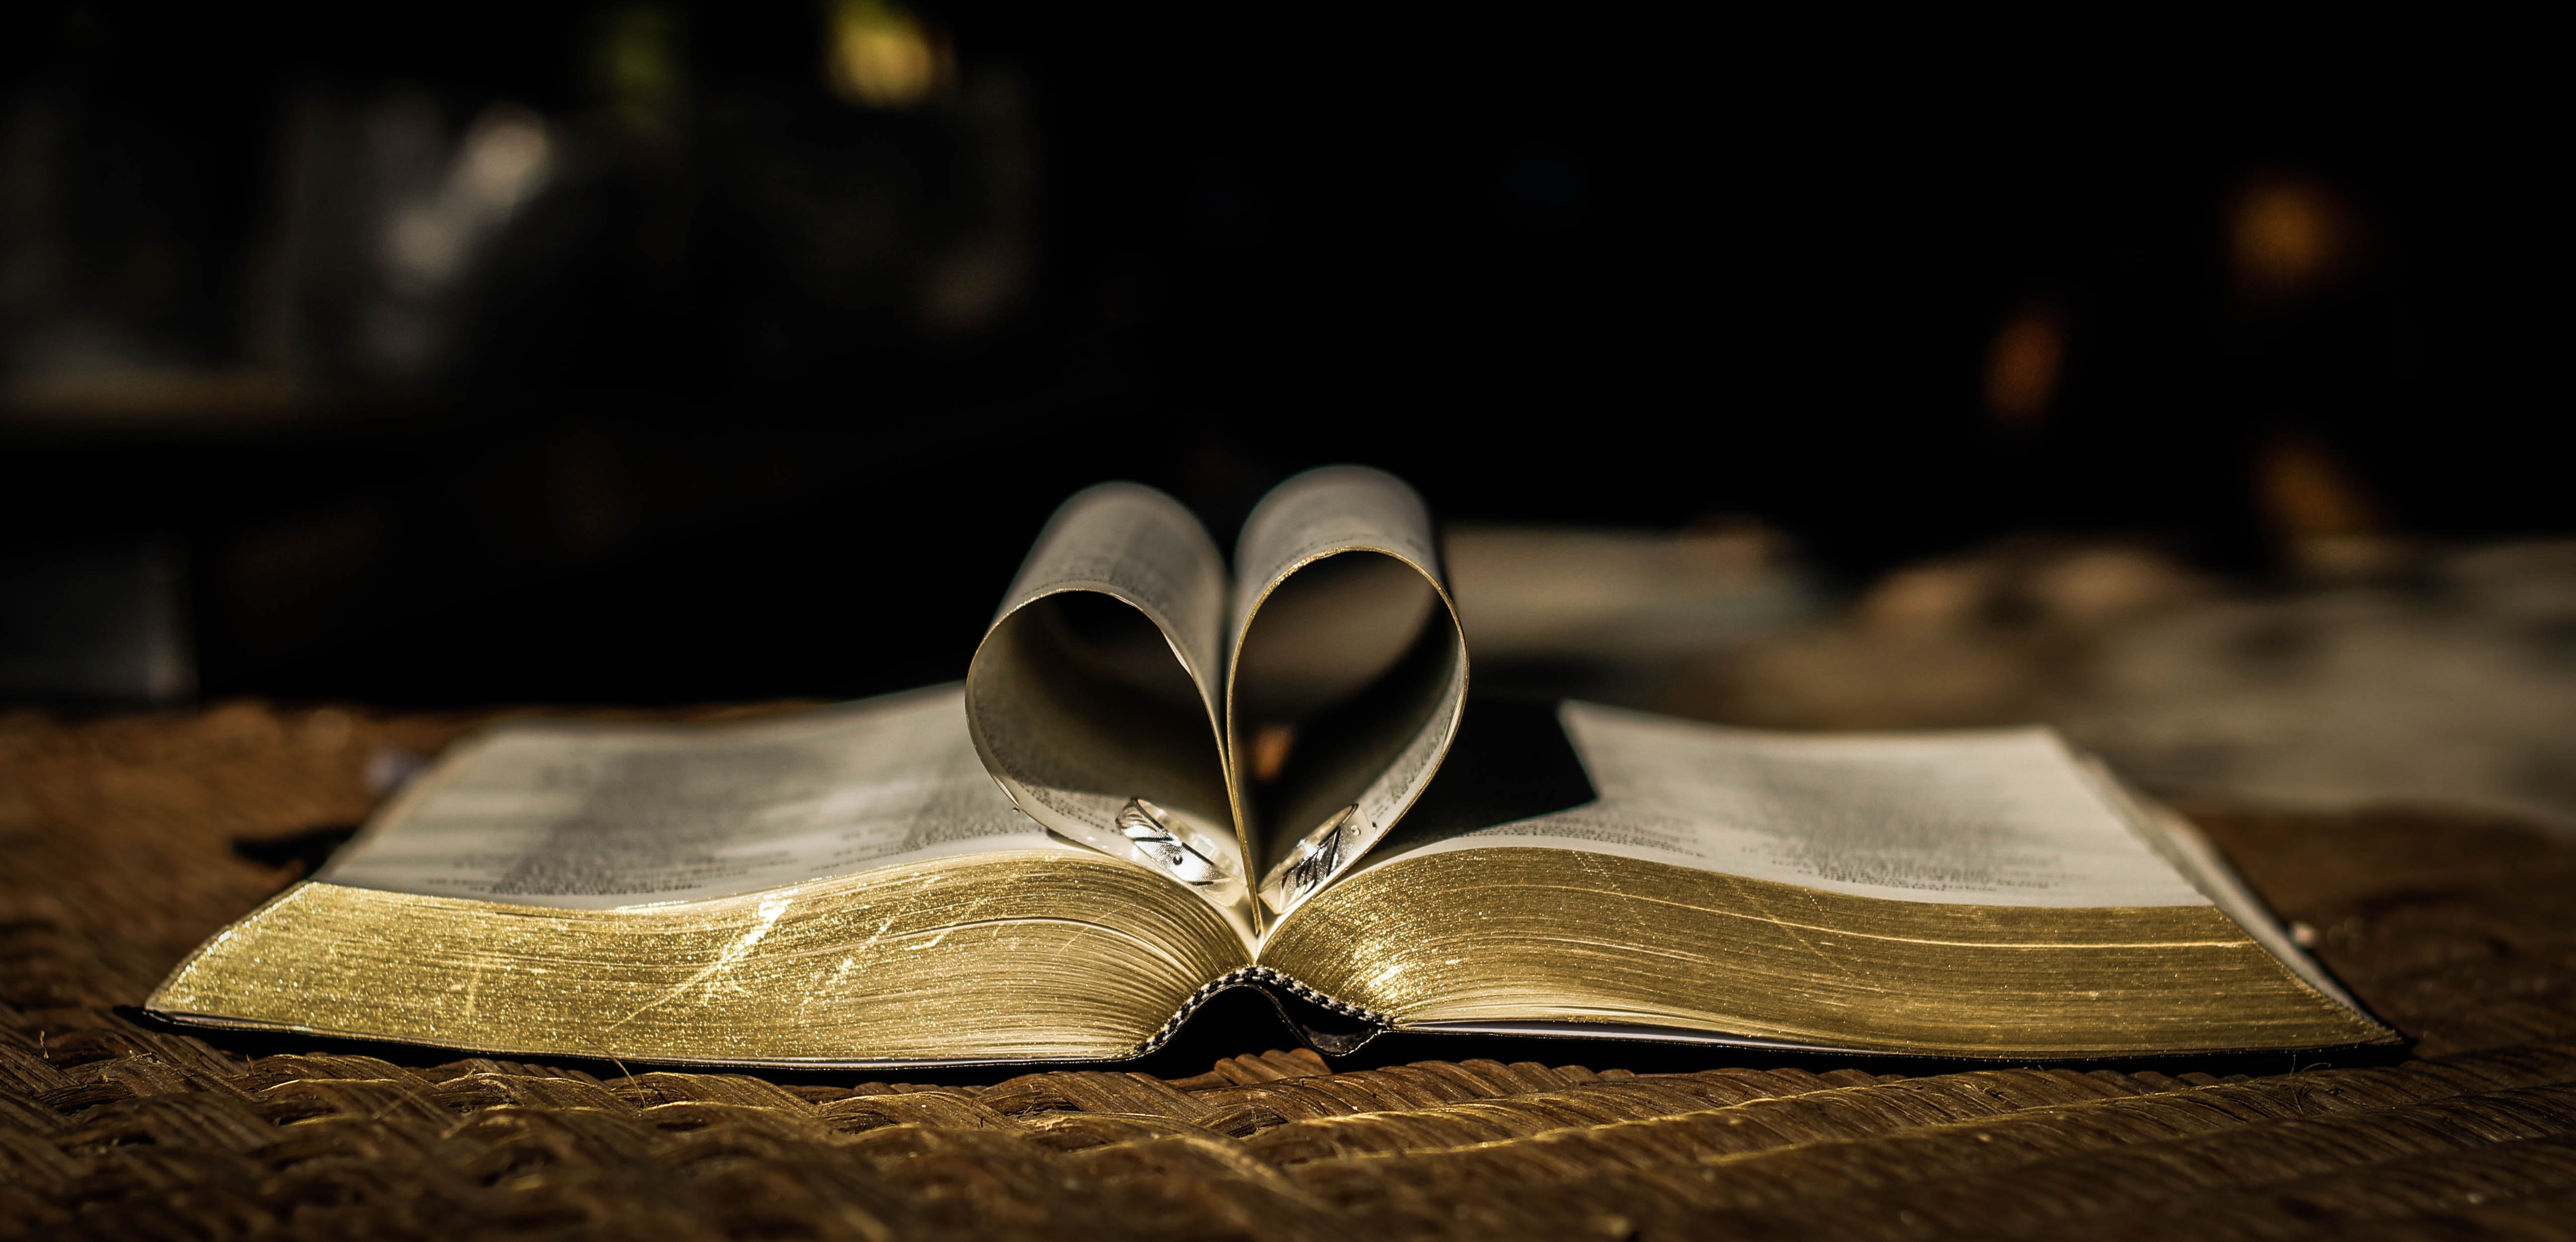 15 Bible Verses About Love and Marriage